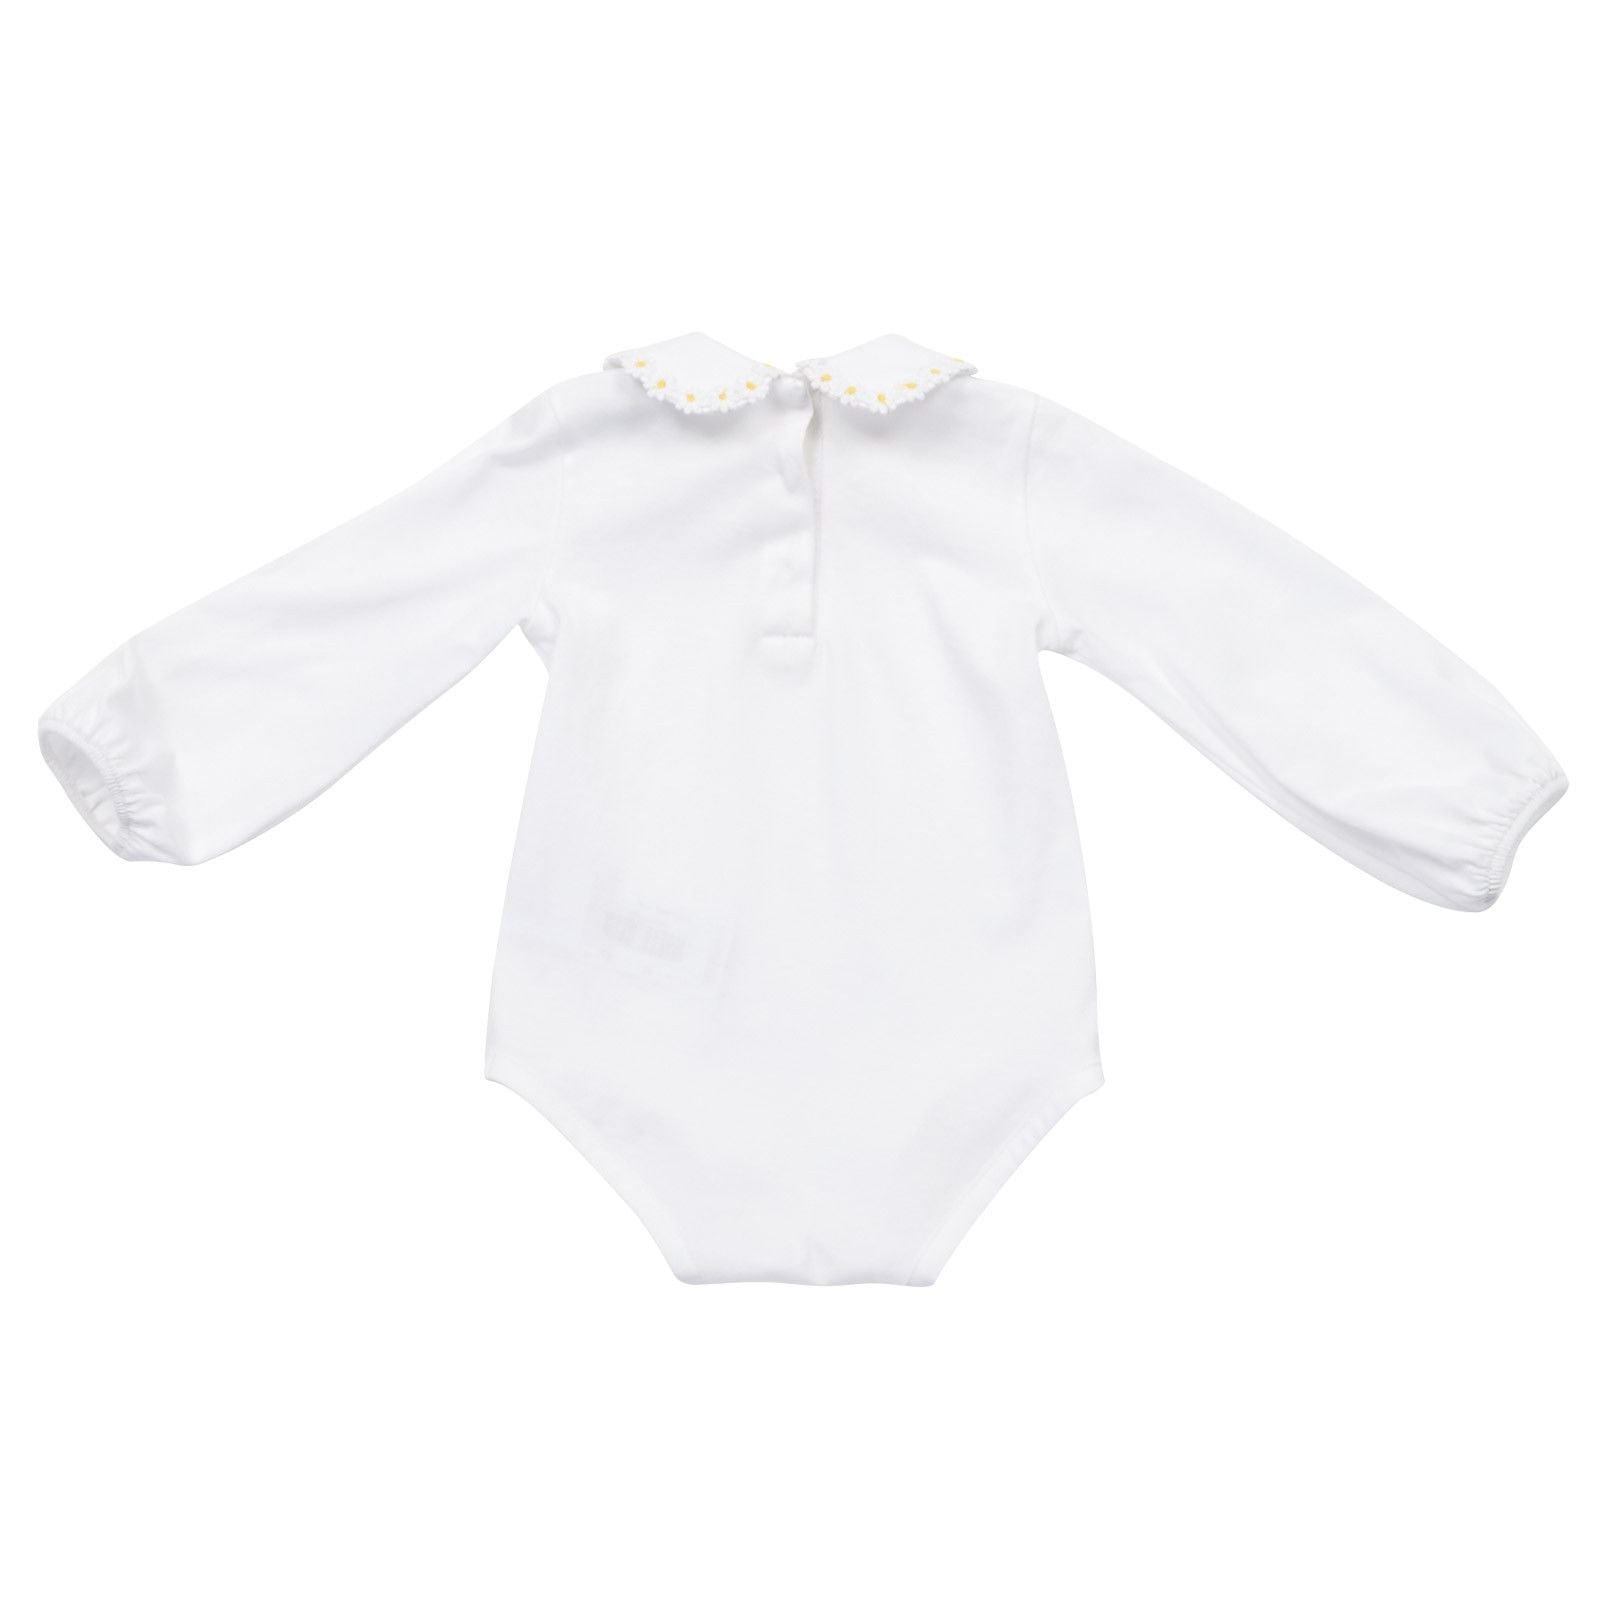 Baby Girls Ivory Bodysuit With Frill Collar - CÉMAROSE | Children's Fashion Store - 2